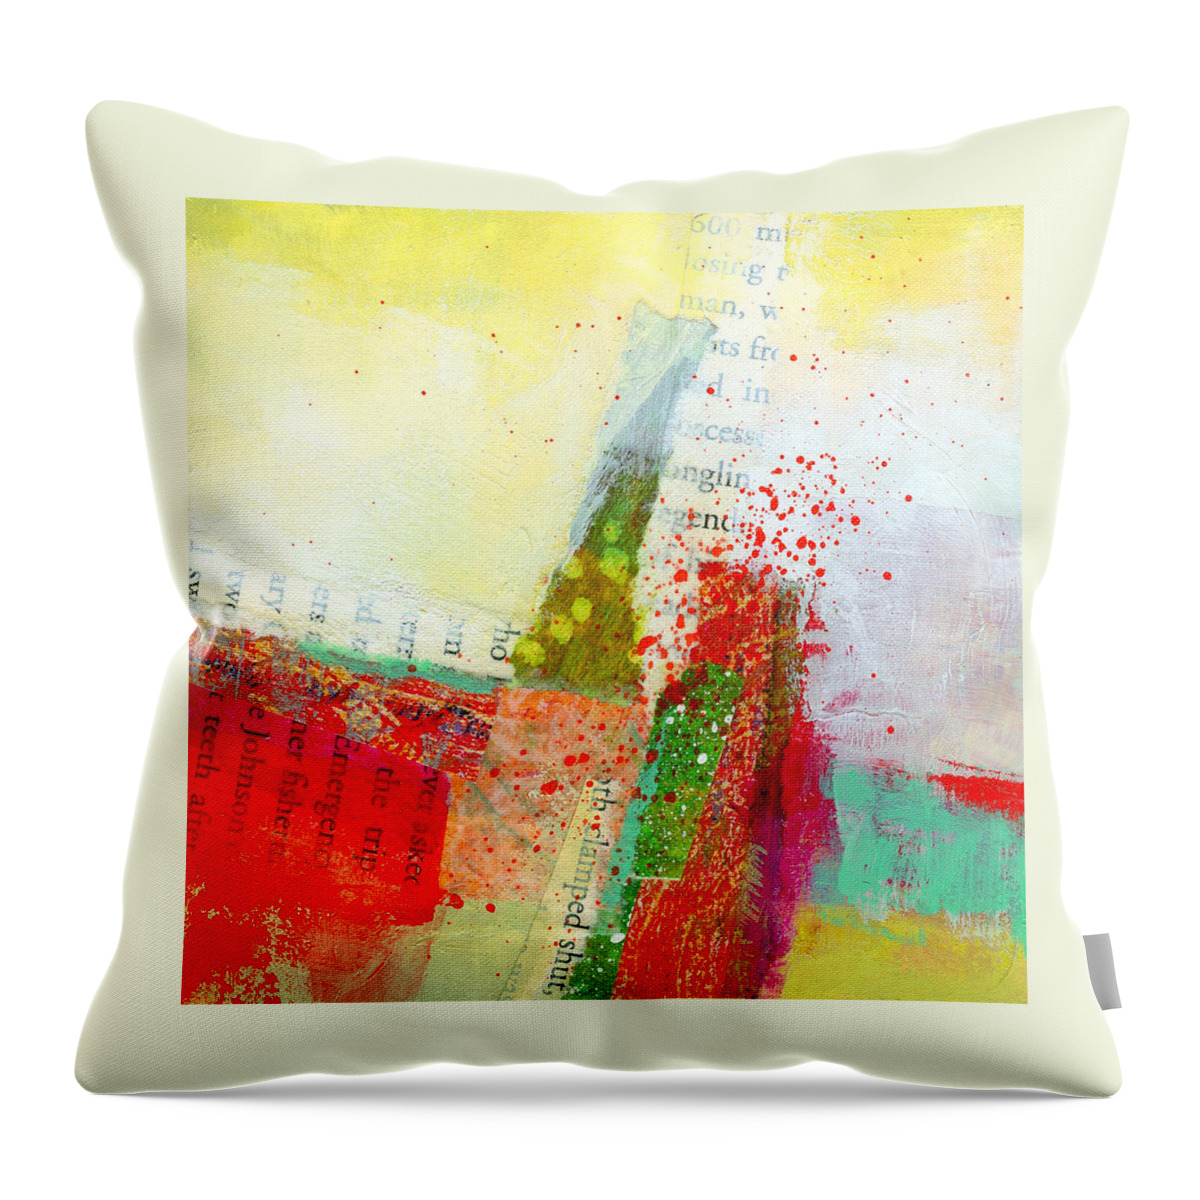 4x4 Throw Pillow featuring the painting Edge 57 by Jane Davies